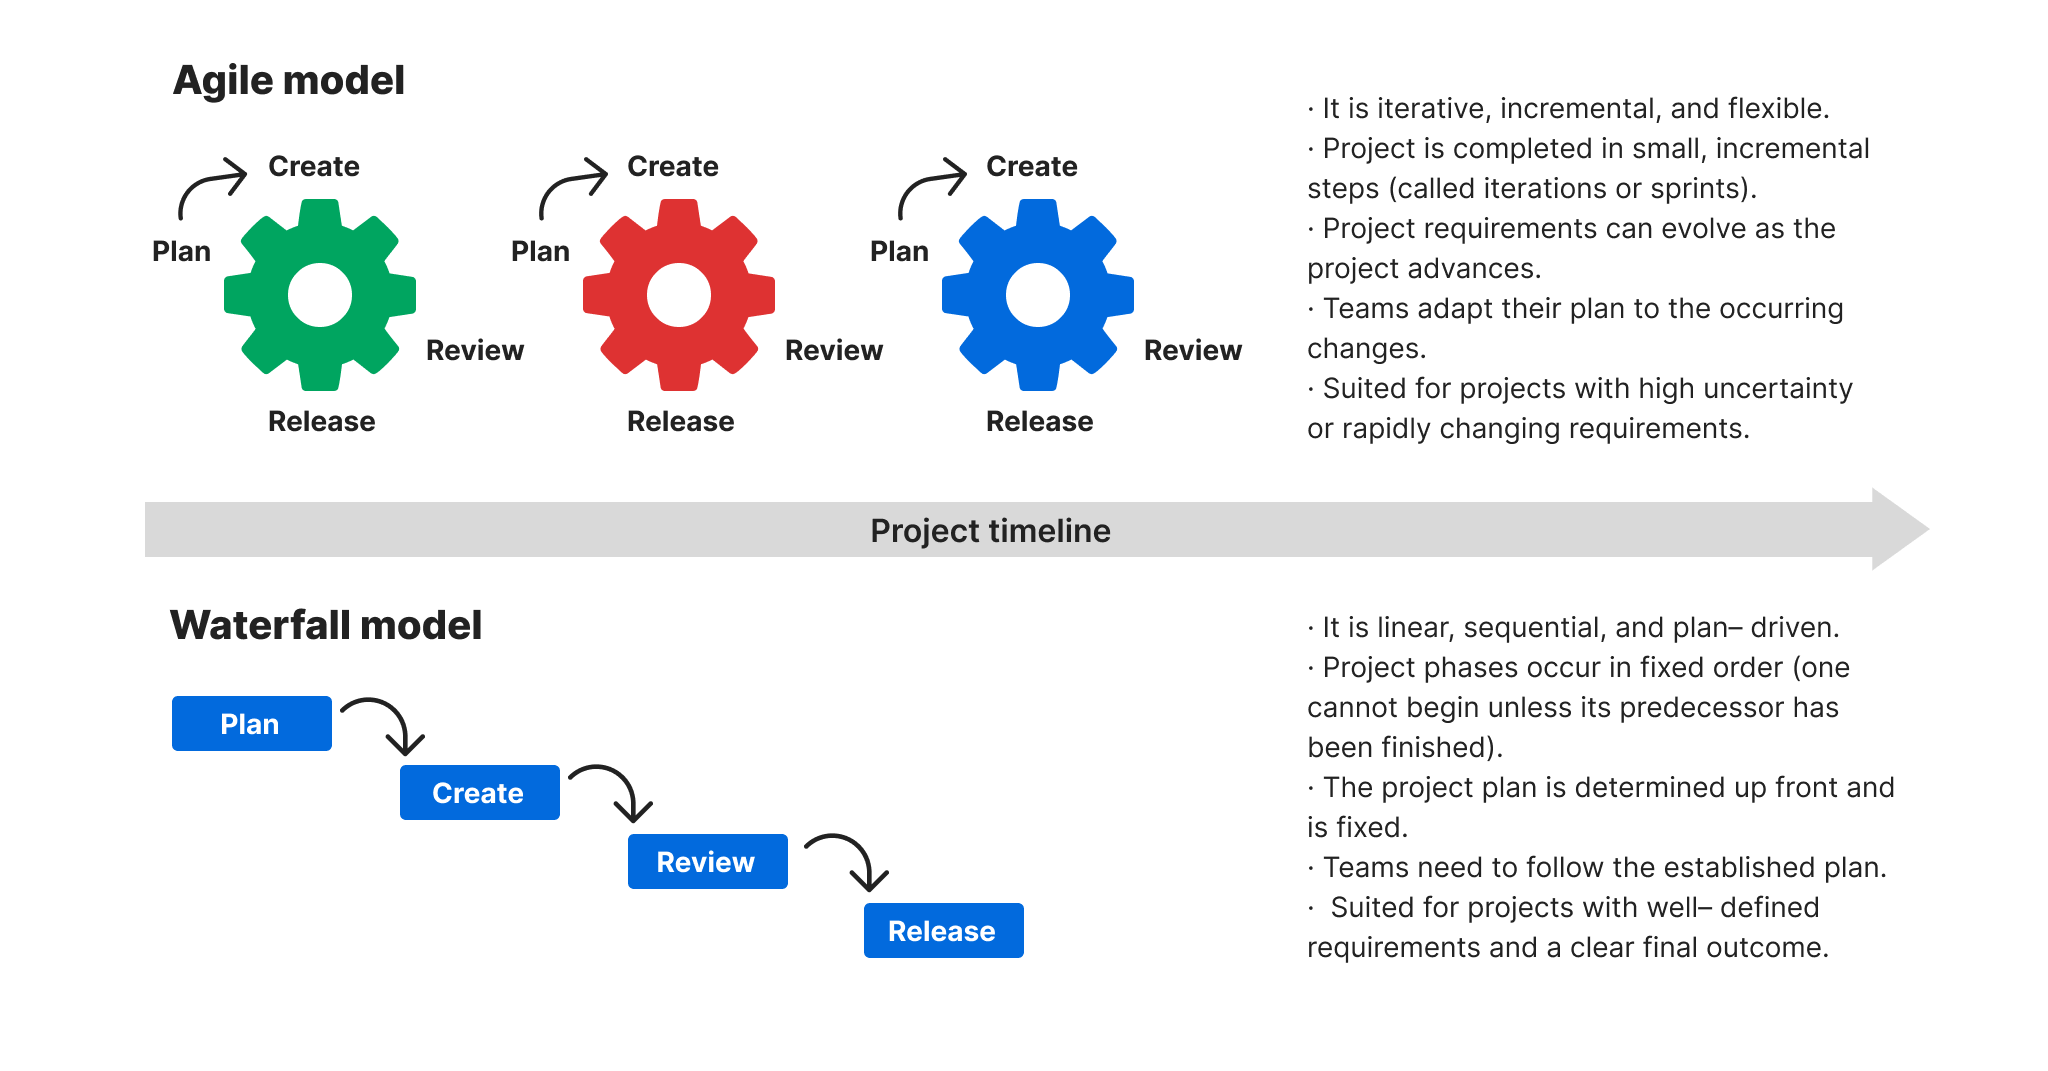 Project management using Agile model vs. Waterfall model